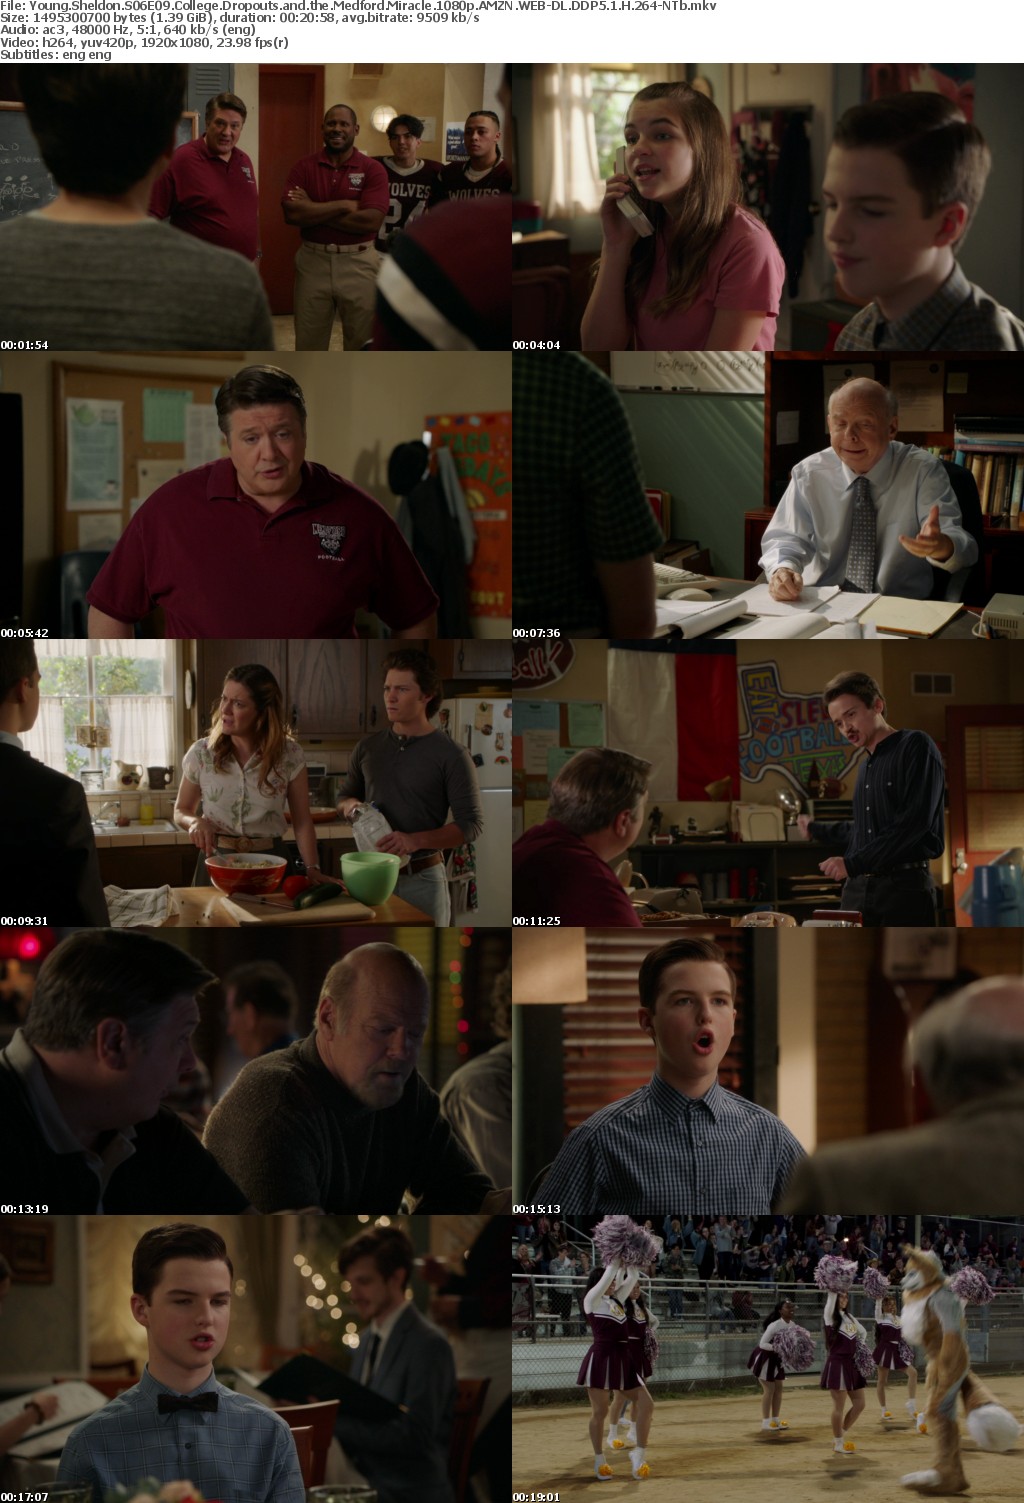 Young Sheldon S06E09 College Dropouts and the Medford Miracle 1080p AMZN WEBRip DDP5 1 x264-NTb